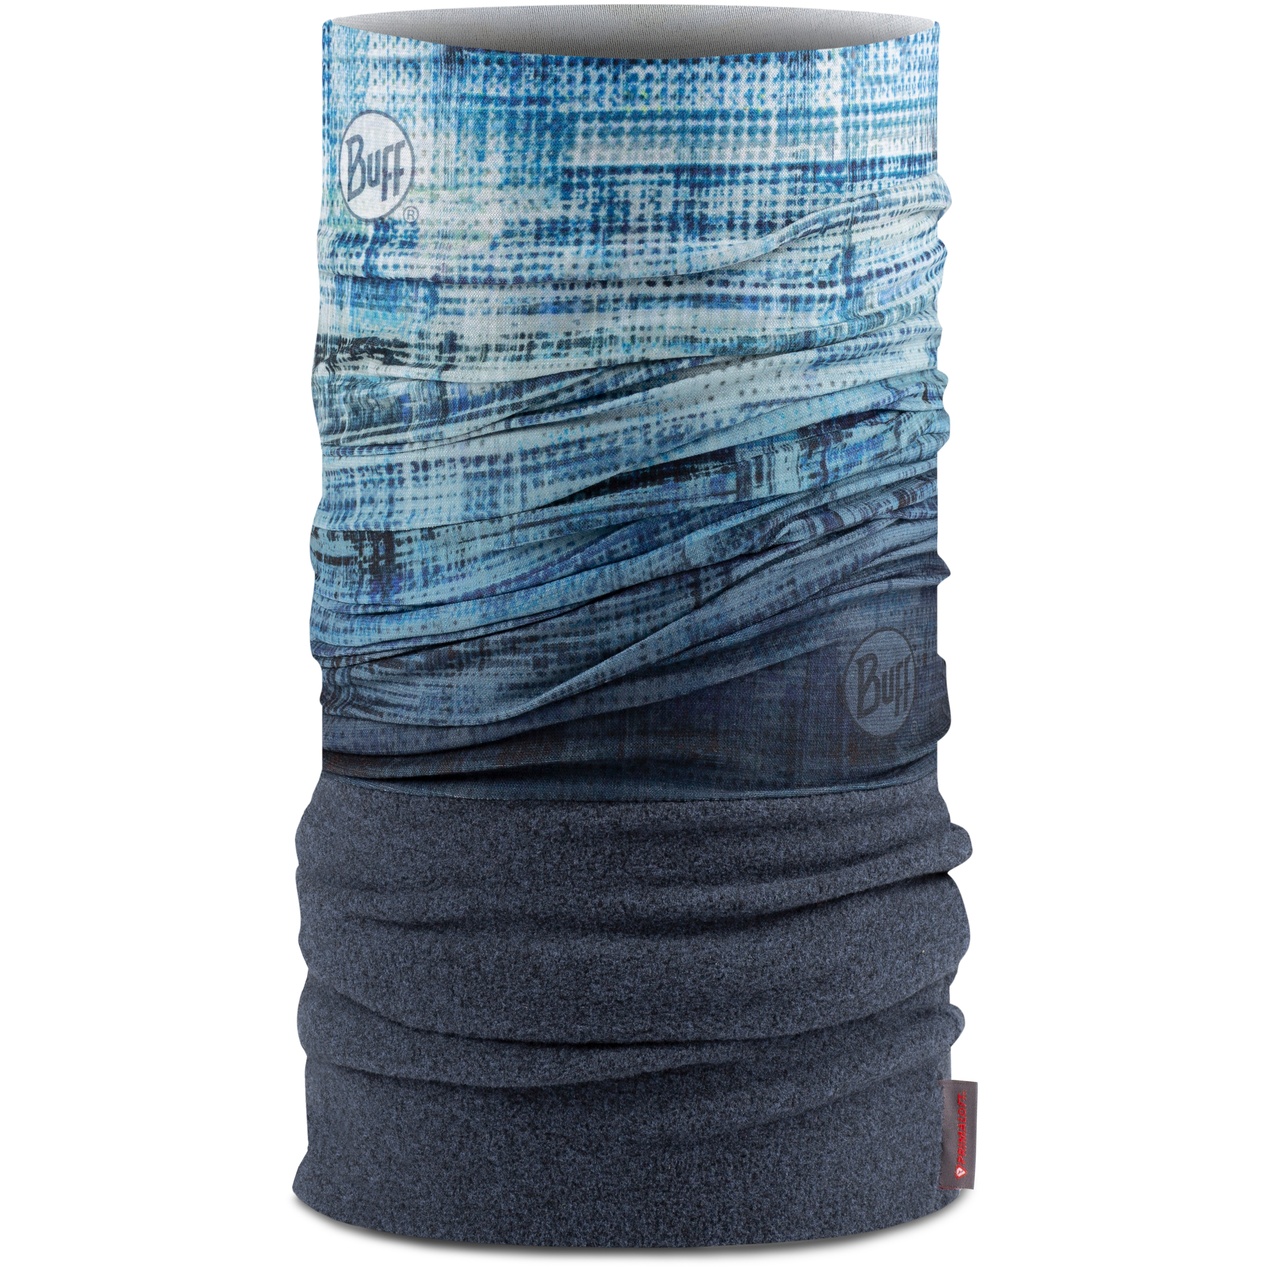 Image of Buff® Polar Multifunctional Cloth - Synaes Blue